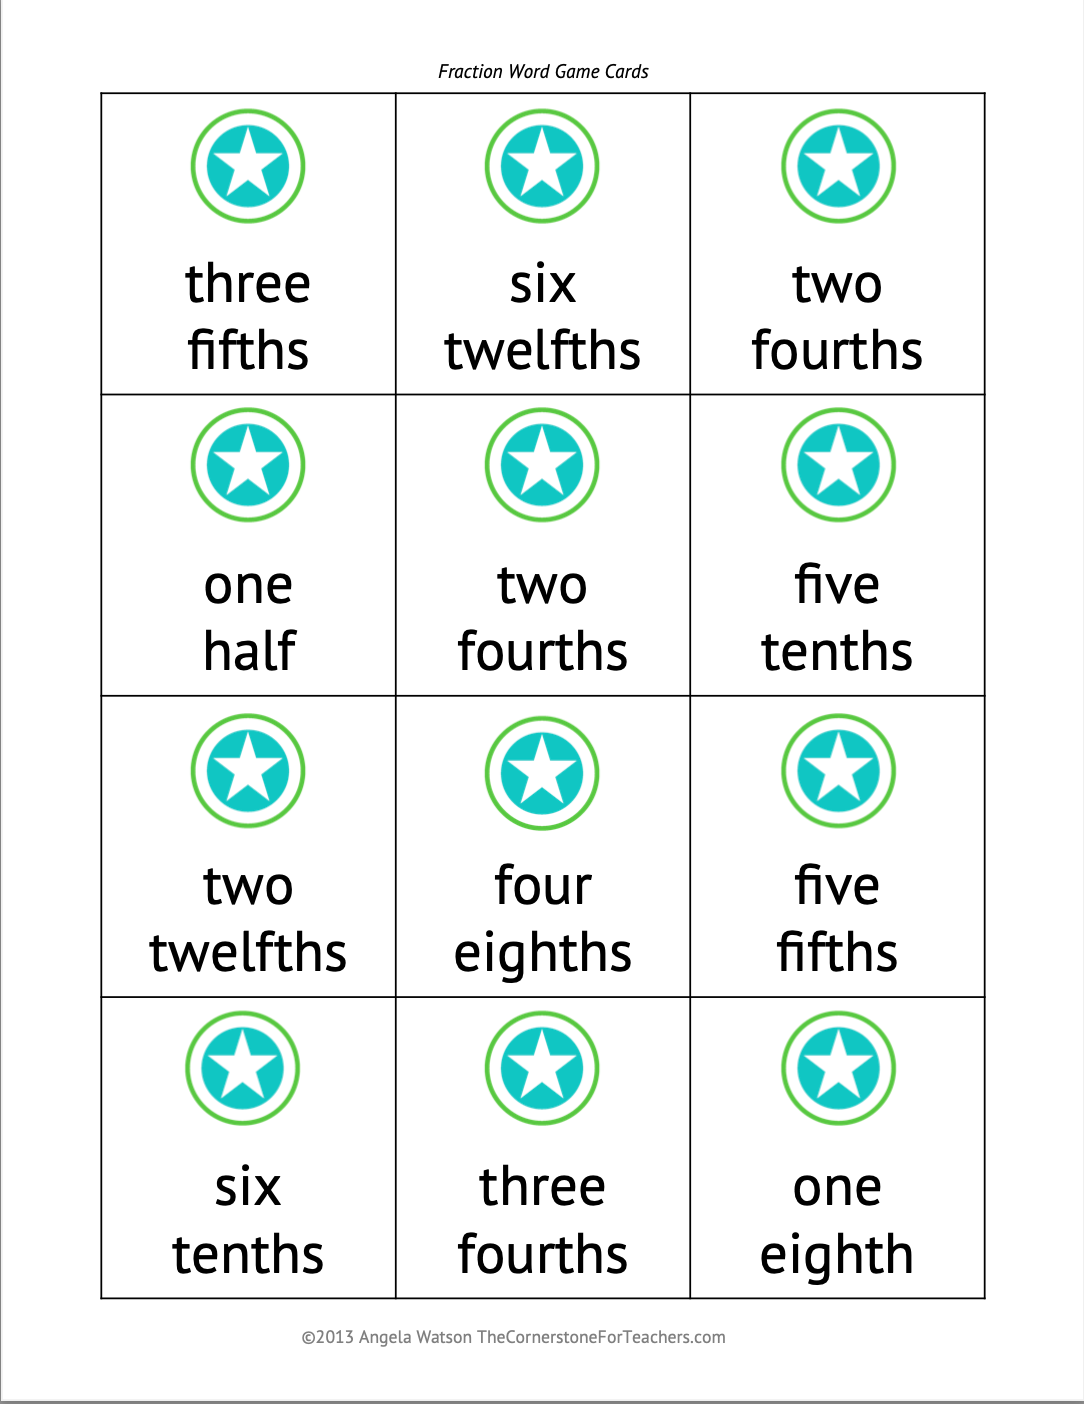 FREE Fraction Cards for sorting, matching, & other hands-on activities